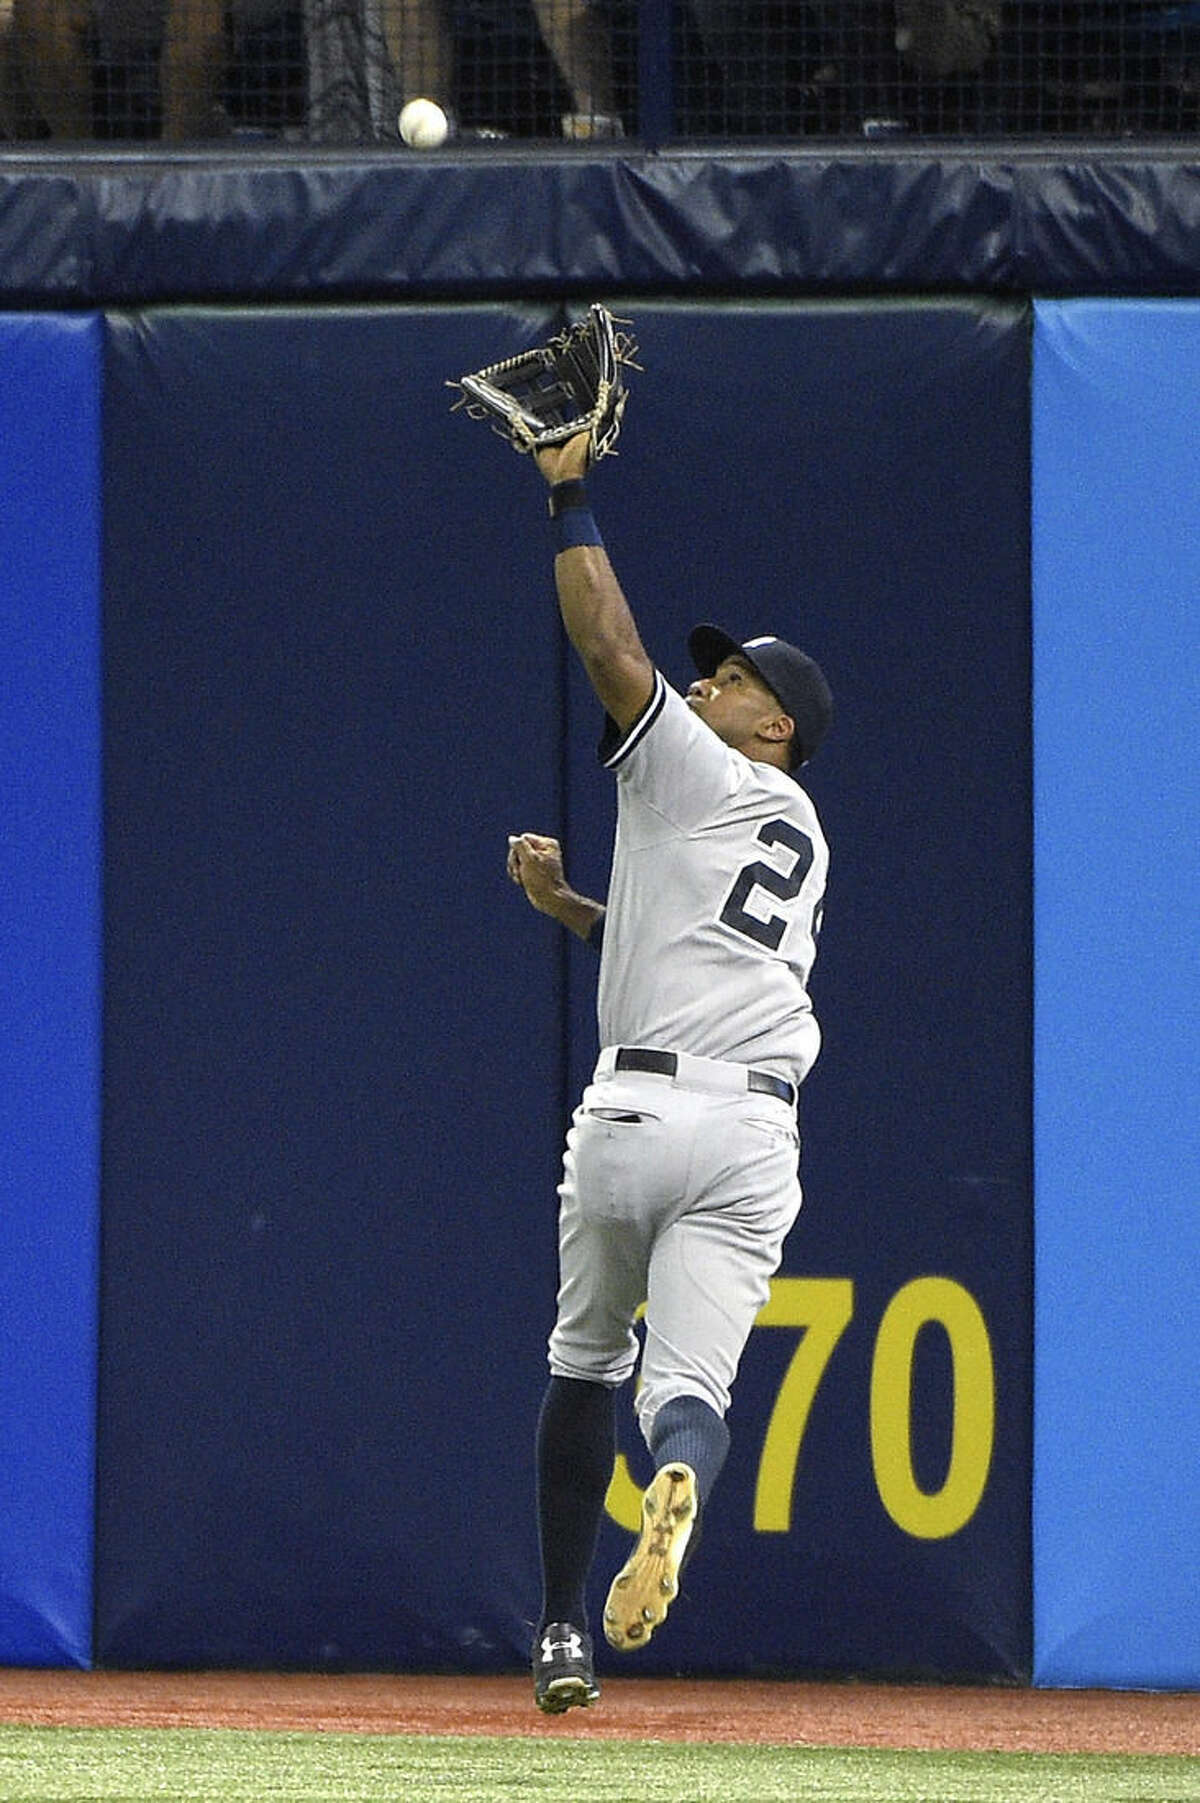 New York Yankees right fielder Chris Young catches a fly out from Tampa Bay Rays' Desmond Jennings at the warning track during the fifth inning of a baseball game in St. Petersburg, Fla., Saturday, April 18, 2015.(AP Photo/Phelan M. Ebenhack)